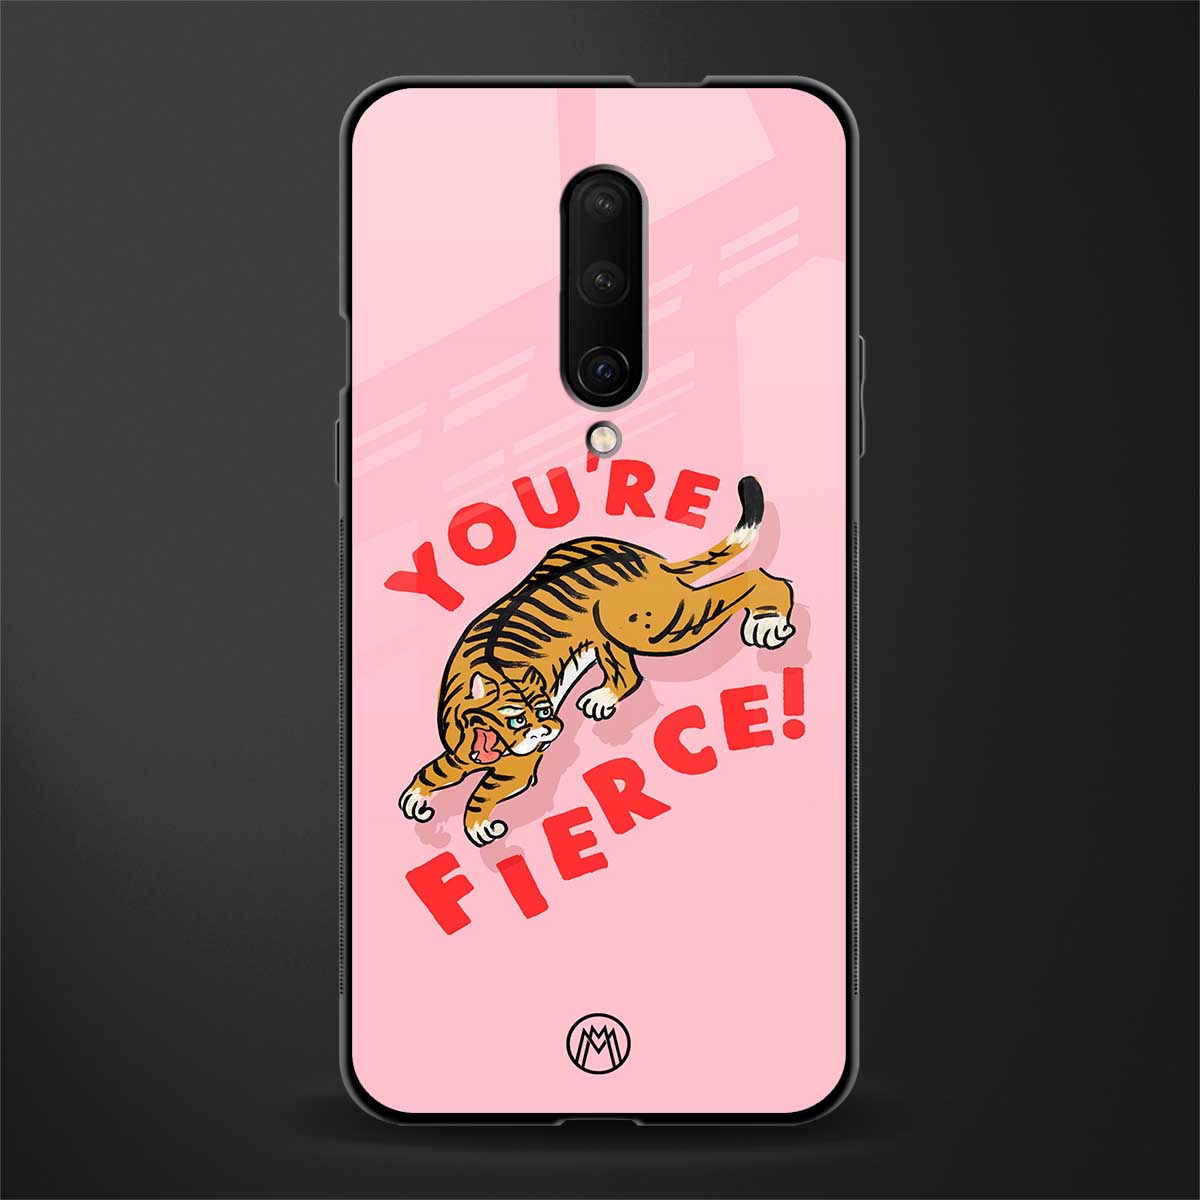 you're fierce glass case for oneplus 7 pro image